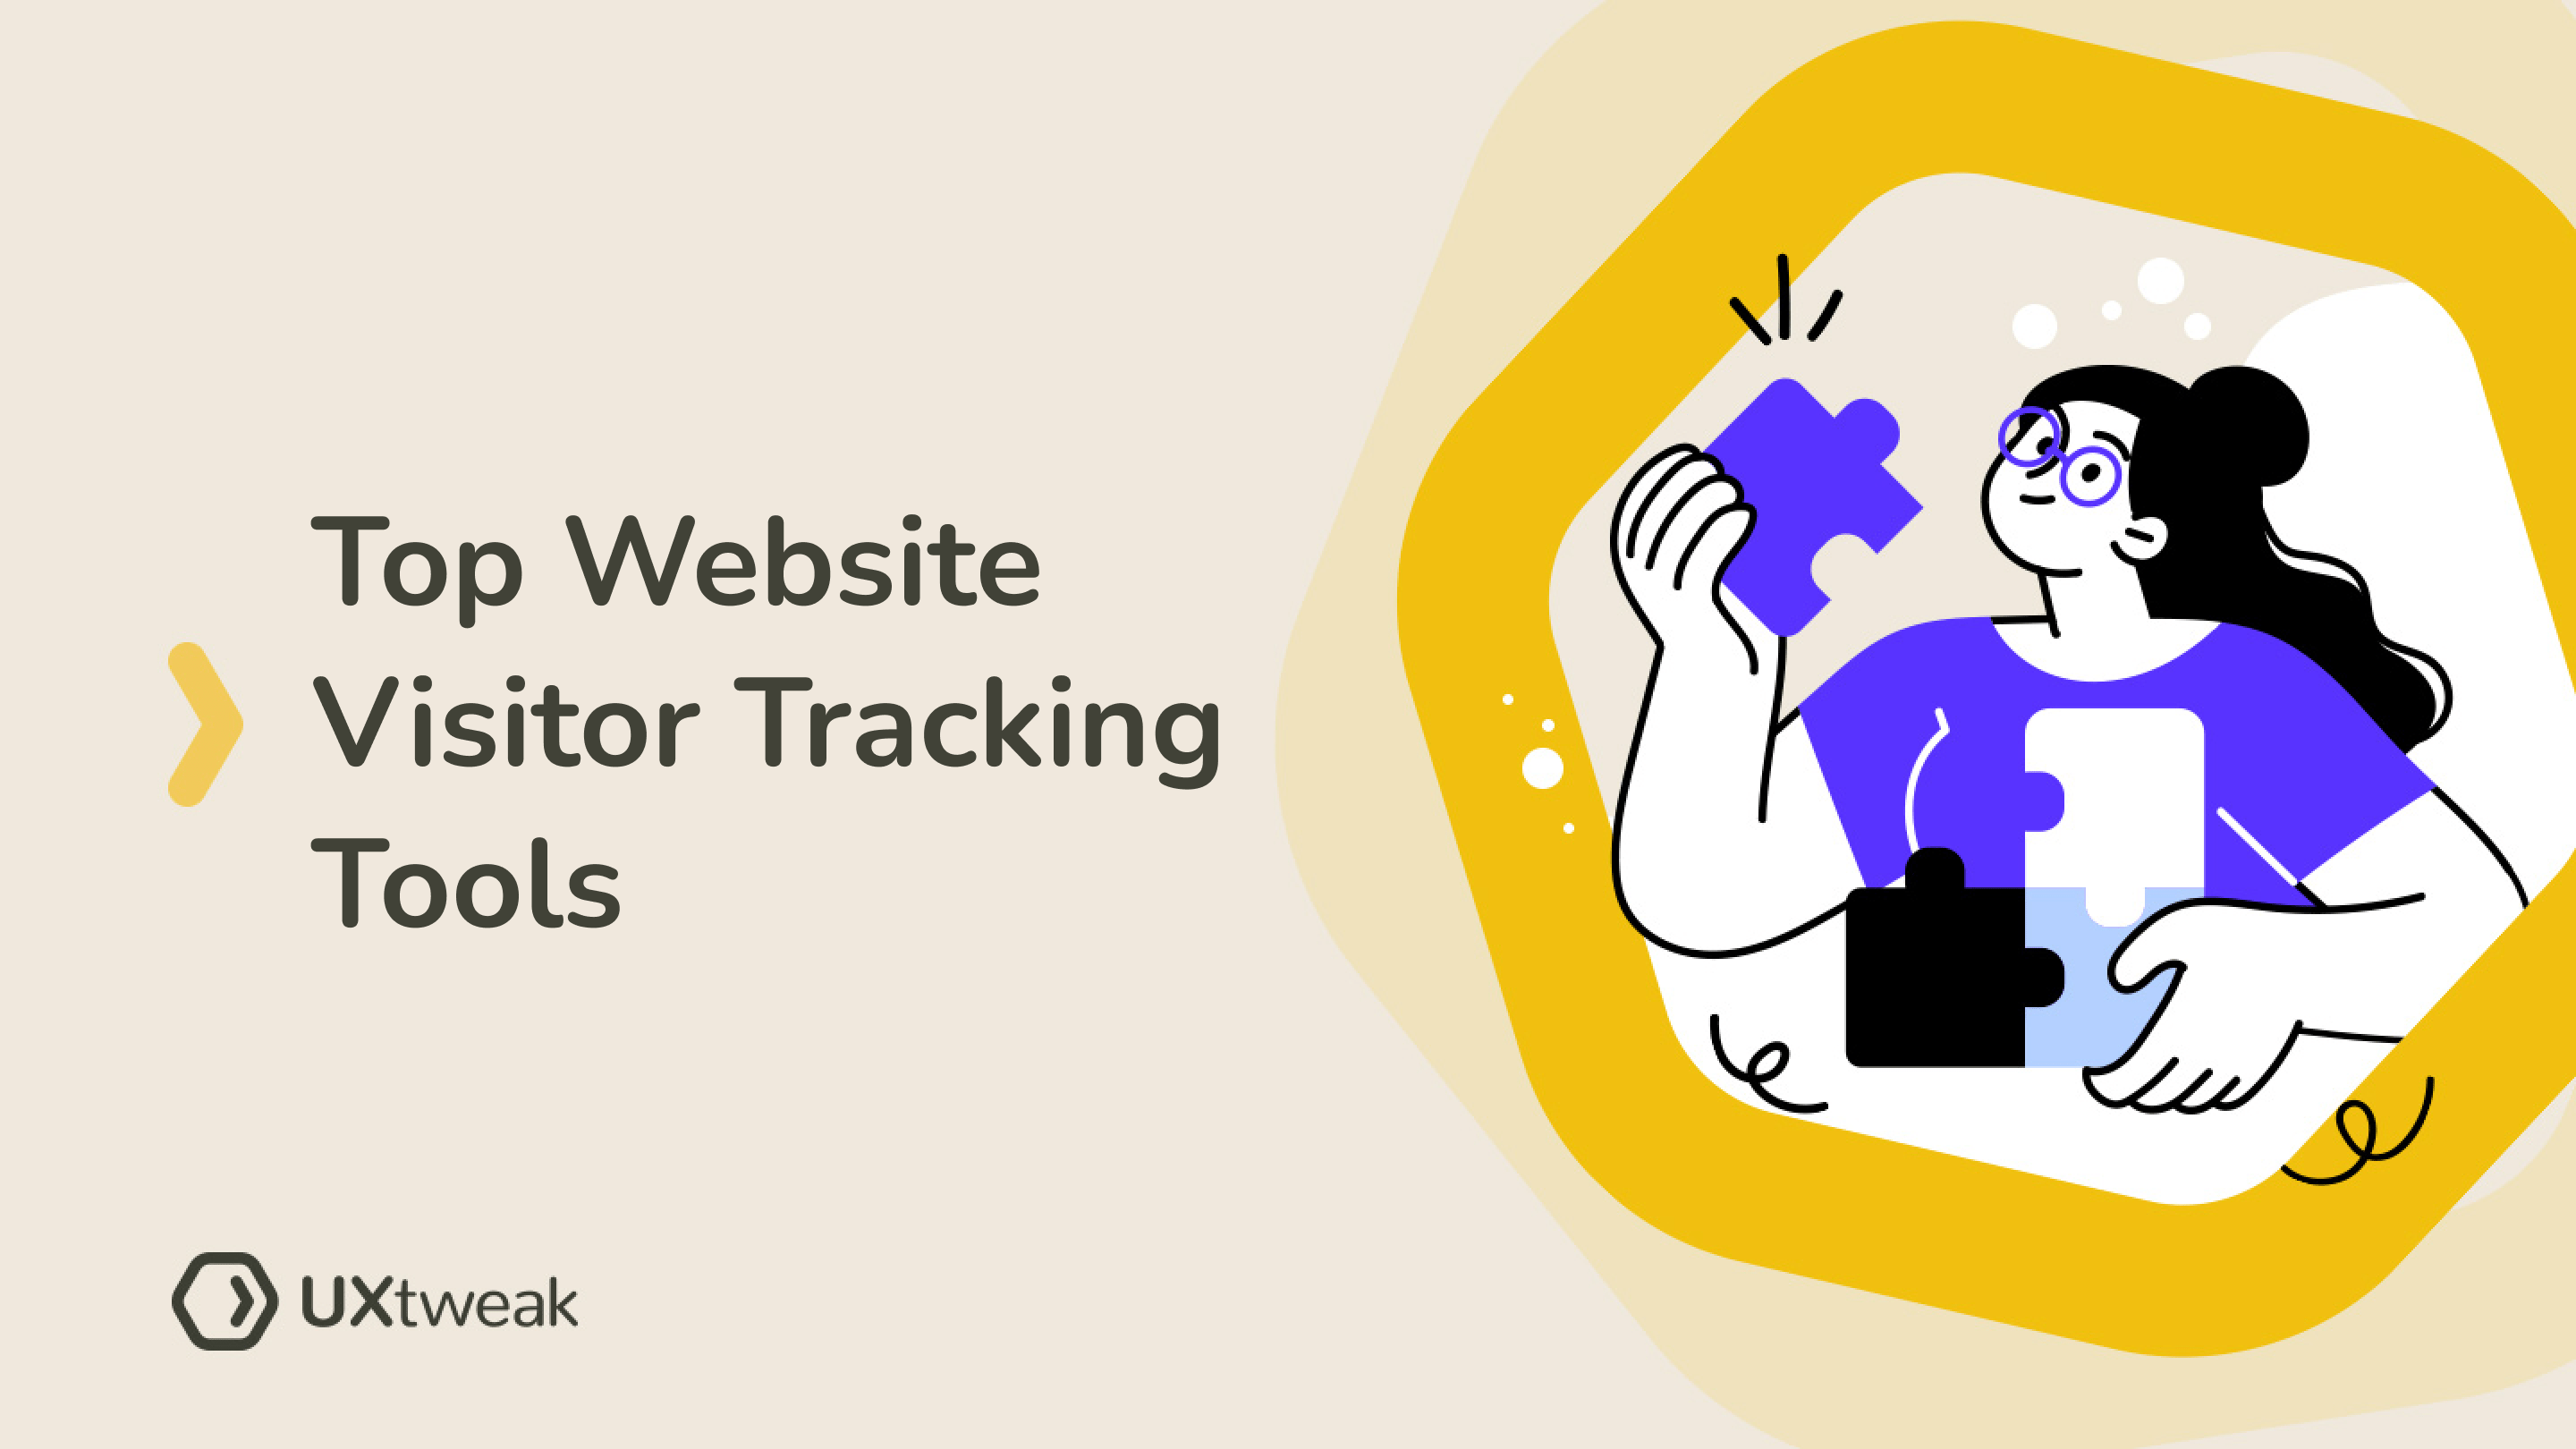 Top 22 website visitor tracking tools in 2022